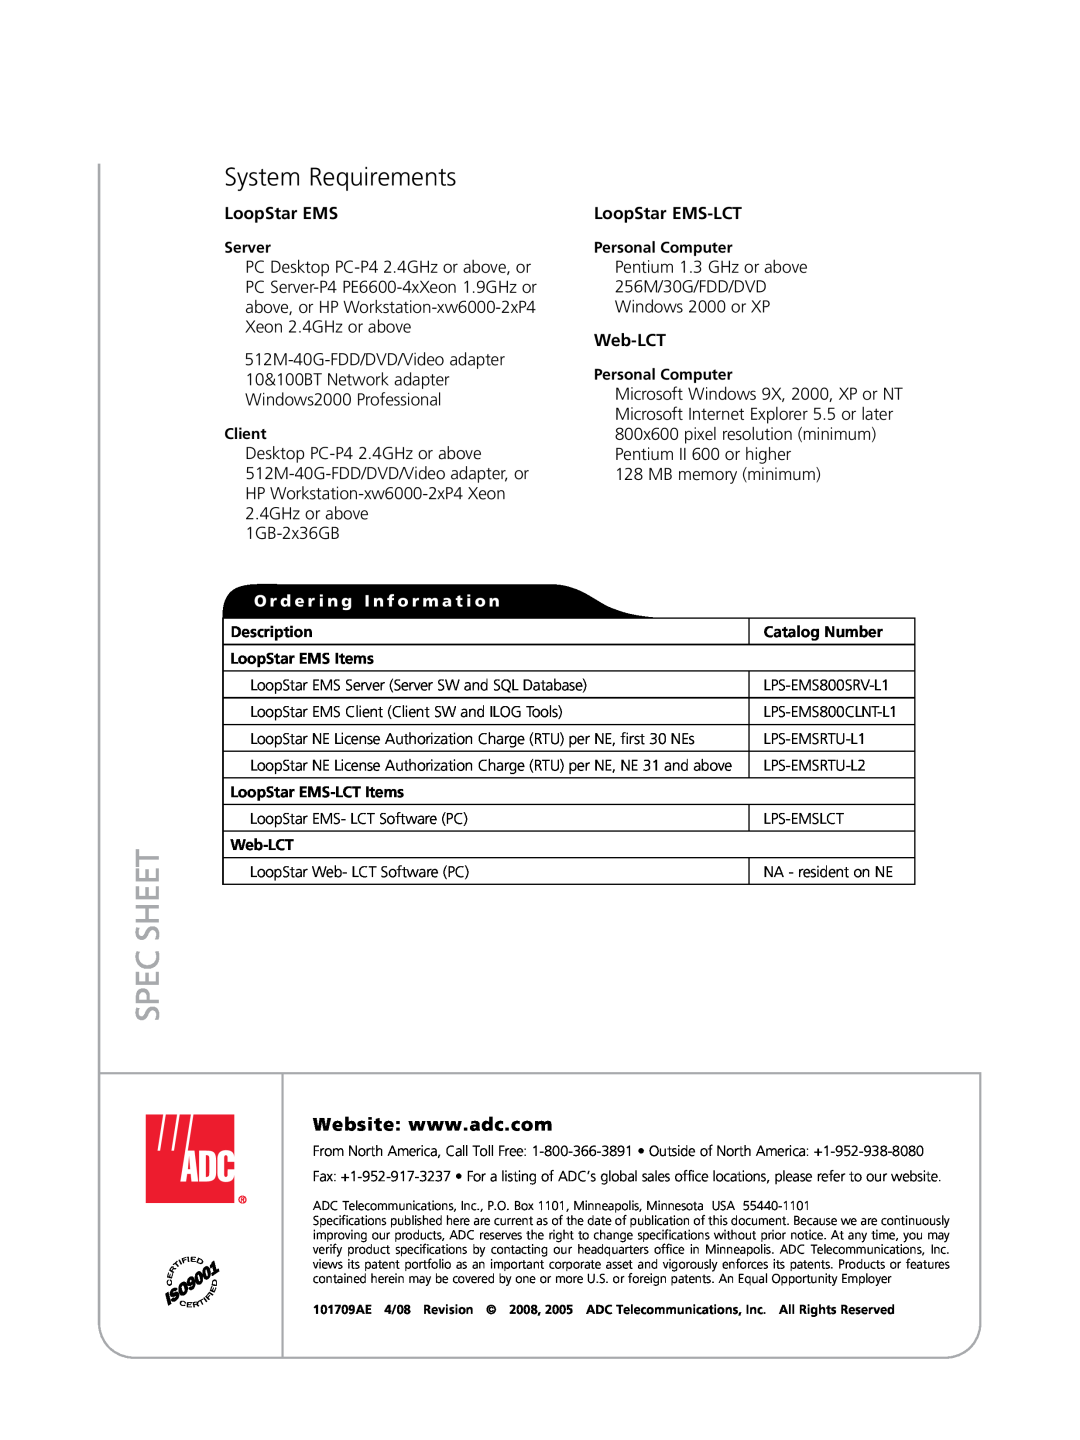 ADC 1600, 3600 manual Spec Sheet, System Requirements 